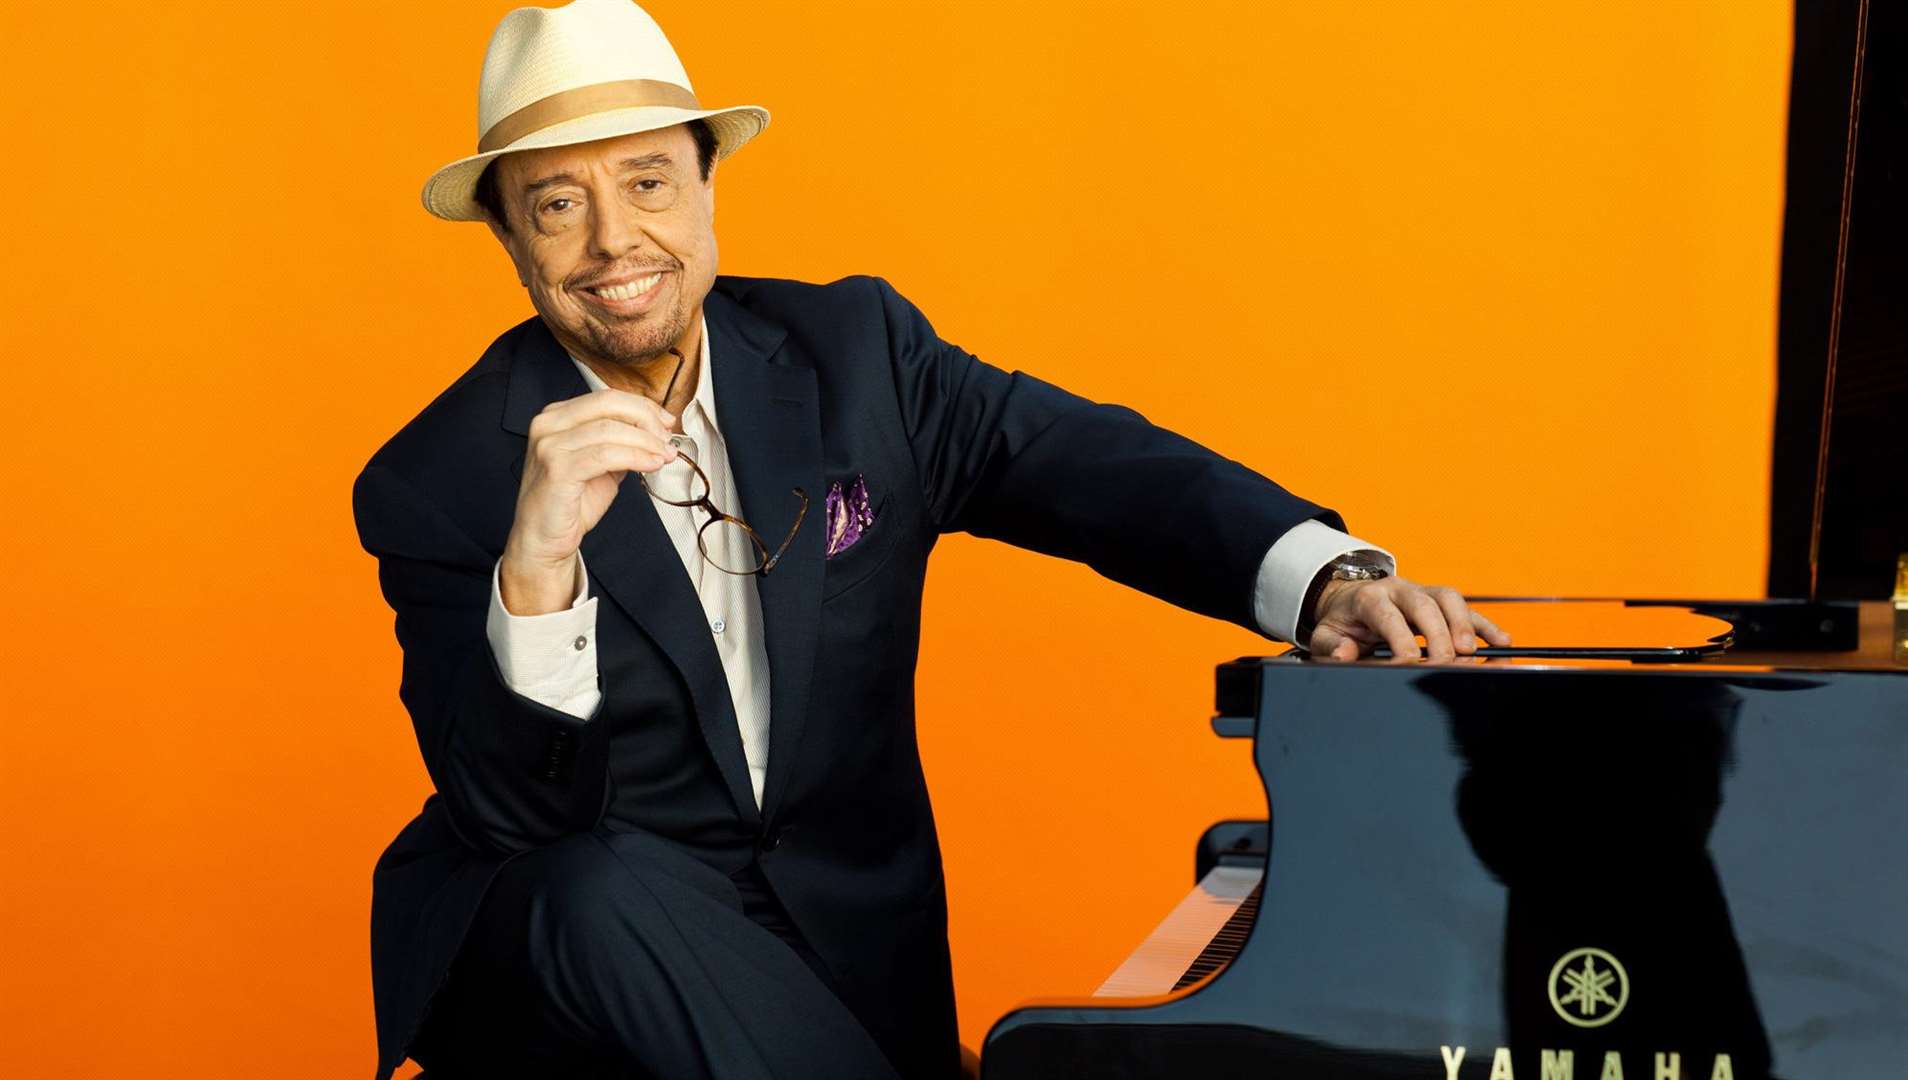 Sergio Mendes will be performing over the bank holiday weekend